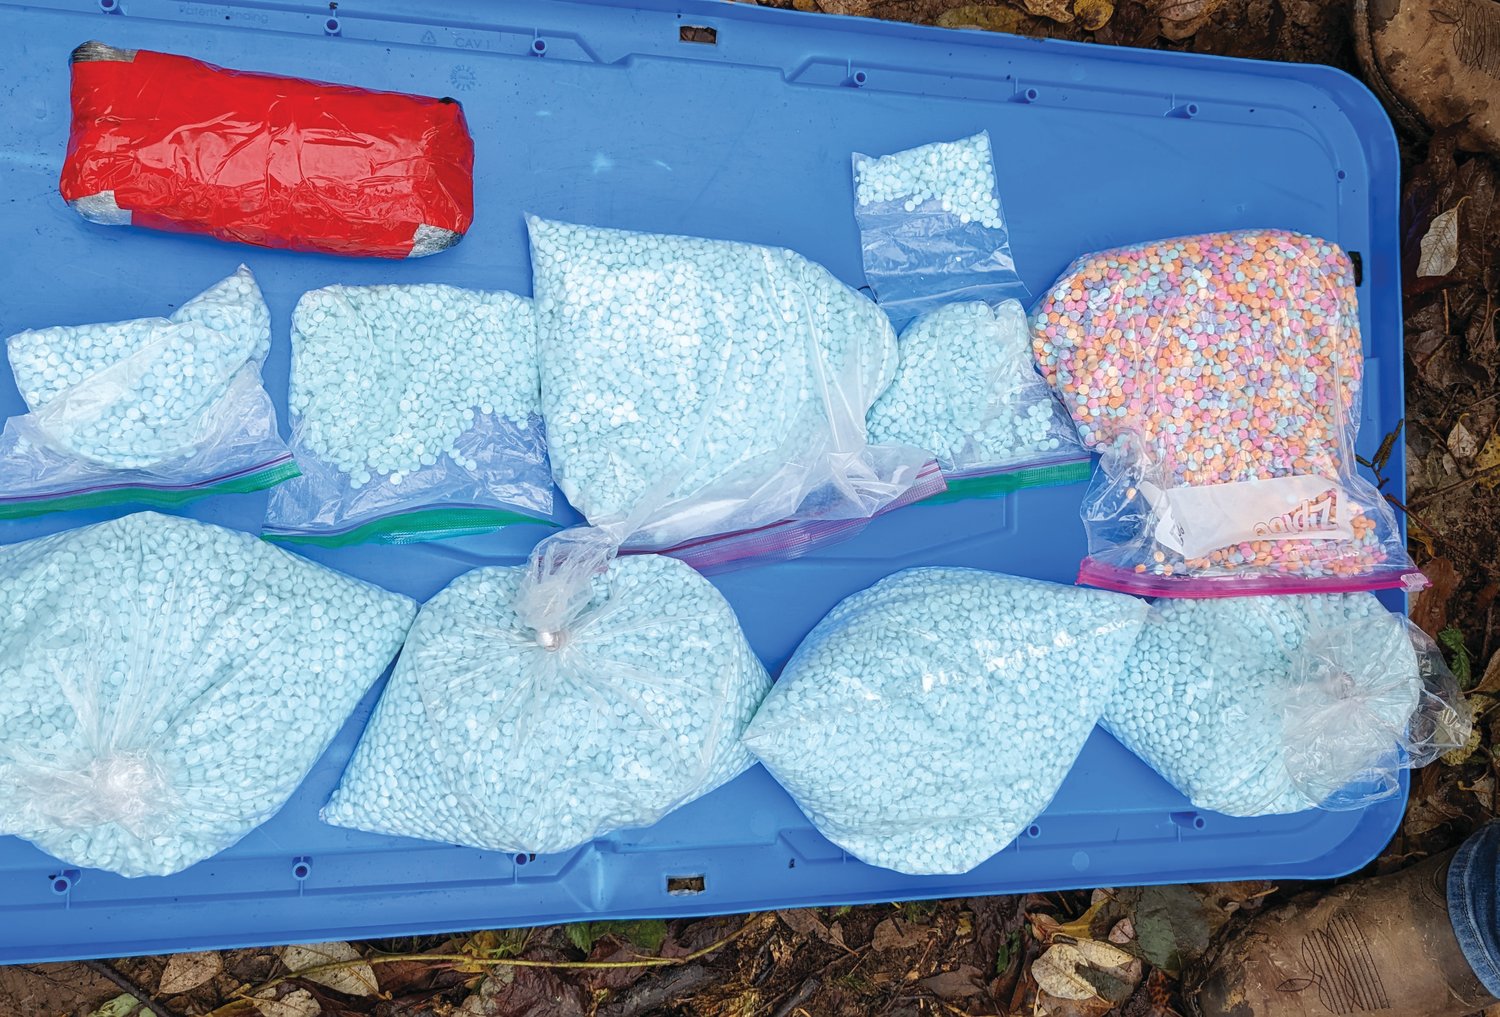 Bags filled with fentanyl seized last week by federal authorities. Law enforcement officials said 11 kilos of fentanyl pills were confiscated, as well as 10 kilos of methamphetamine, and three kilos of heroin.